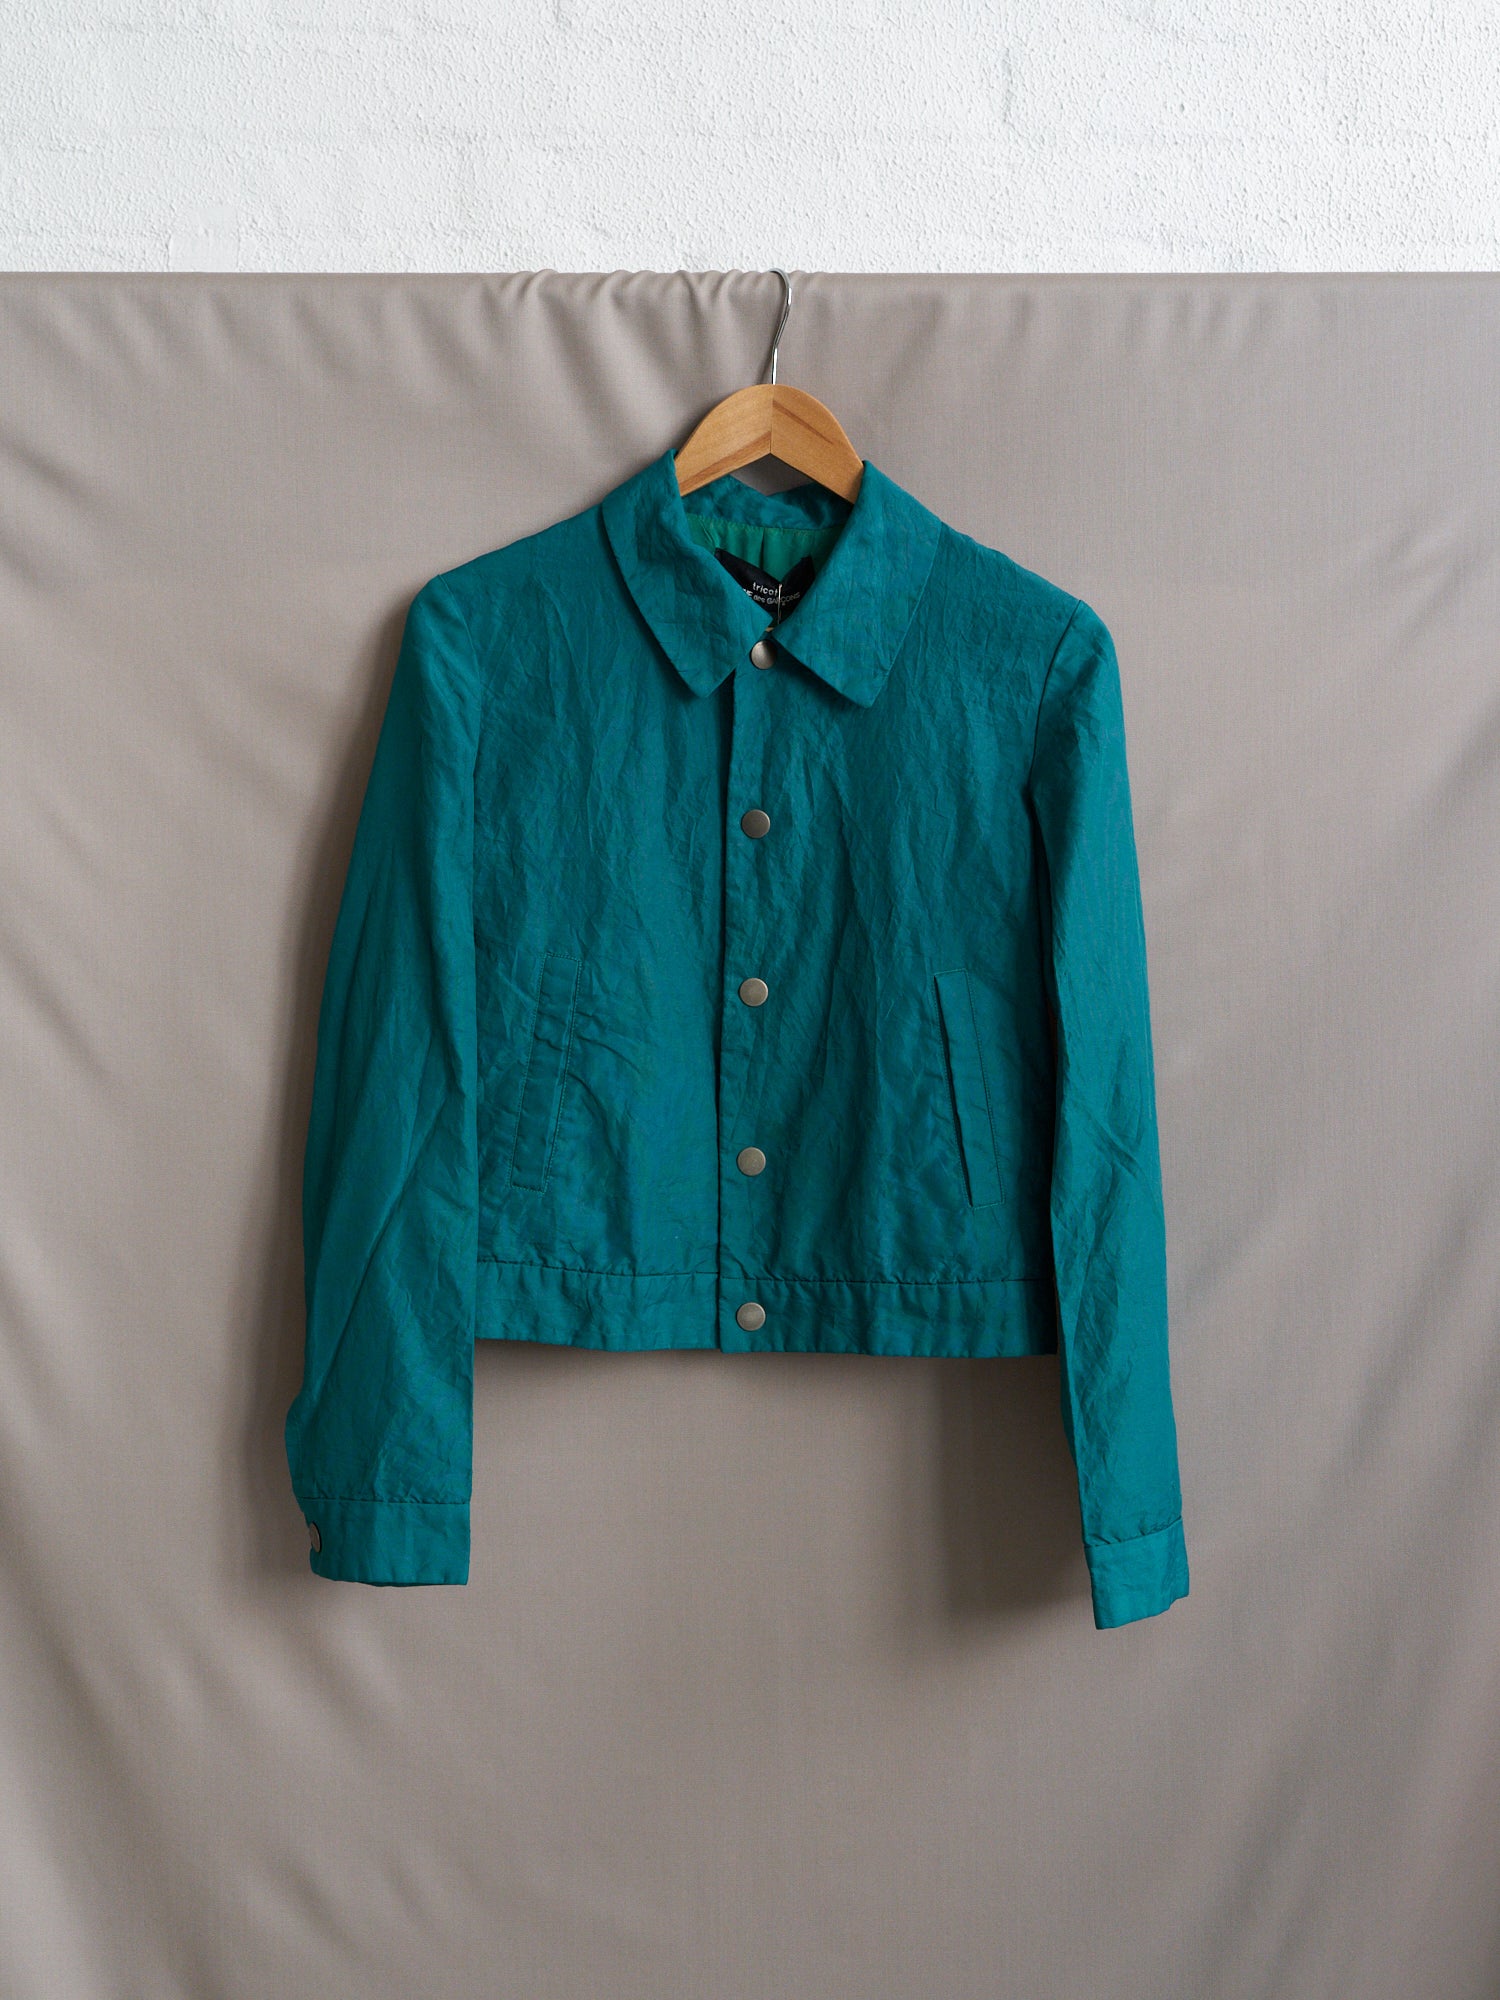 Tricot Comme des Garcons 1995 teal creased nylon snap button jacket - womens M S